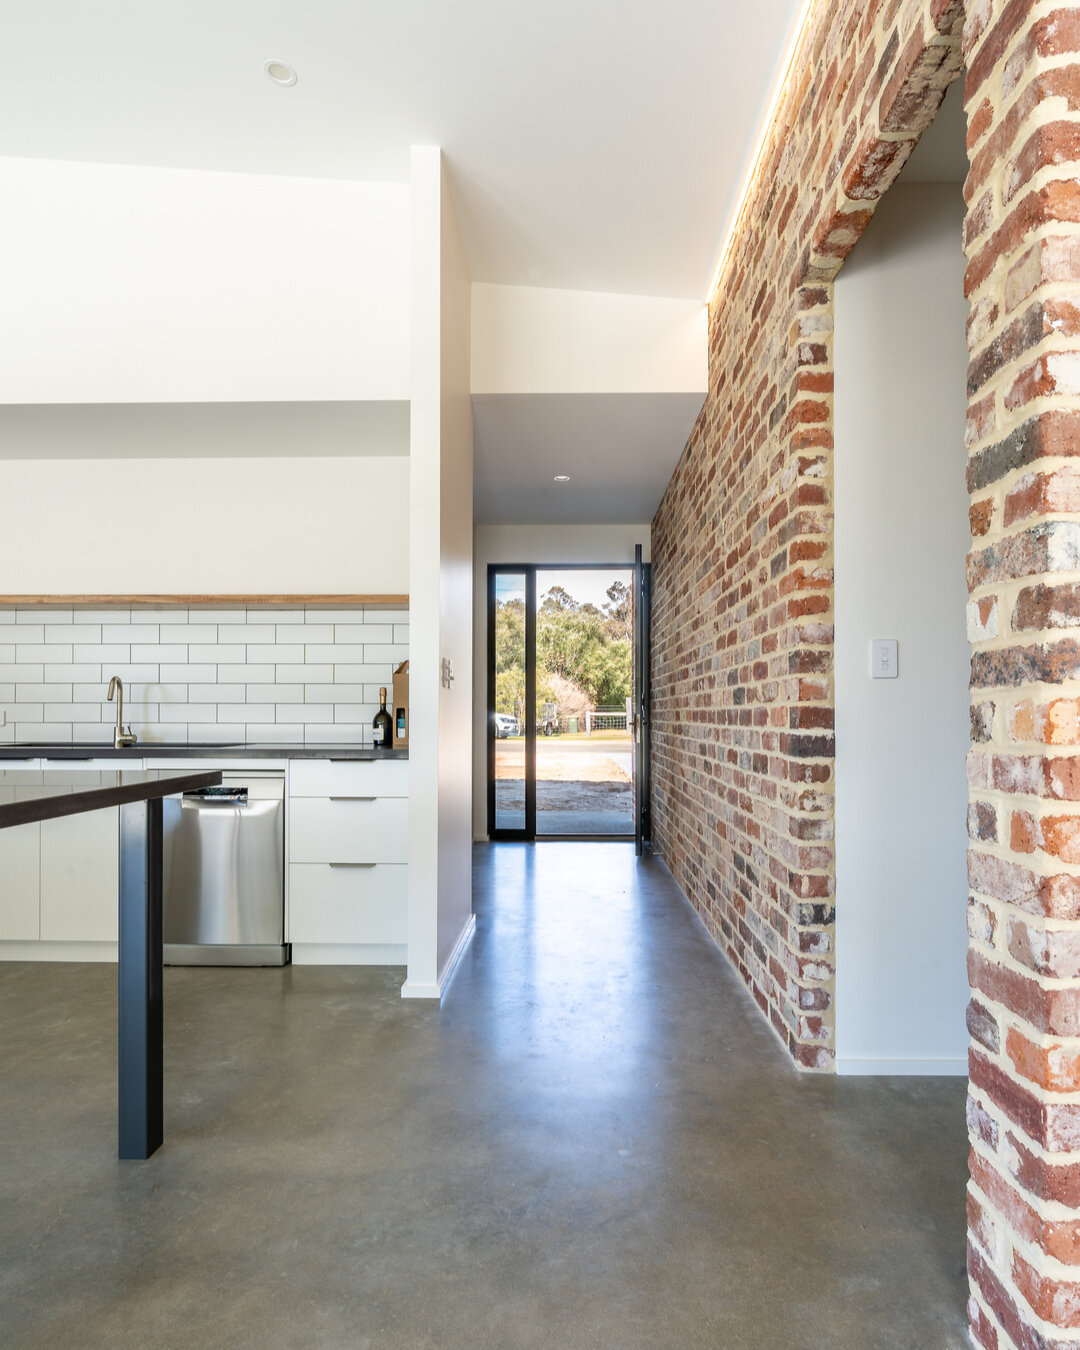 Smokebush House - Completion. Recycled brick wall, burnished concrete floor. ​​​​​​​​
​​​​​​​​
#blackpointconstruction #margaretriver #cowaramup #builder #house #home #design